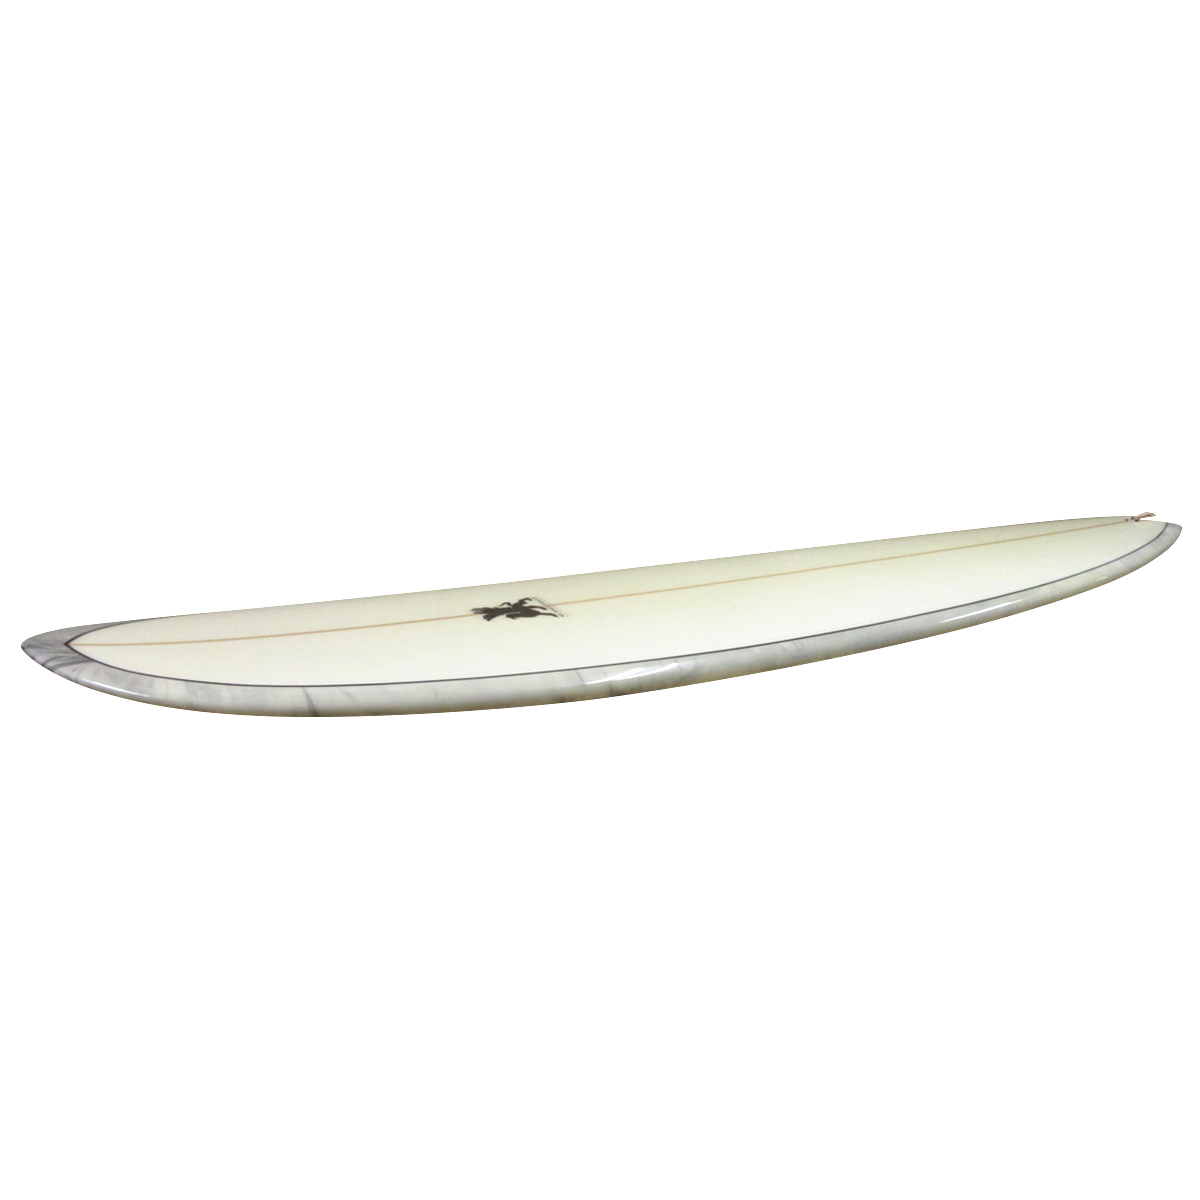 SUNSET POINT SURFBOARDS / Mini Long 8`0 shaped by Greg Griffin